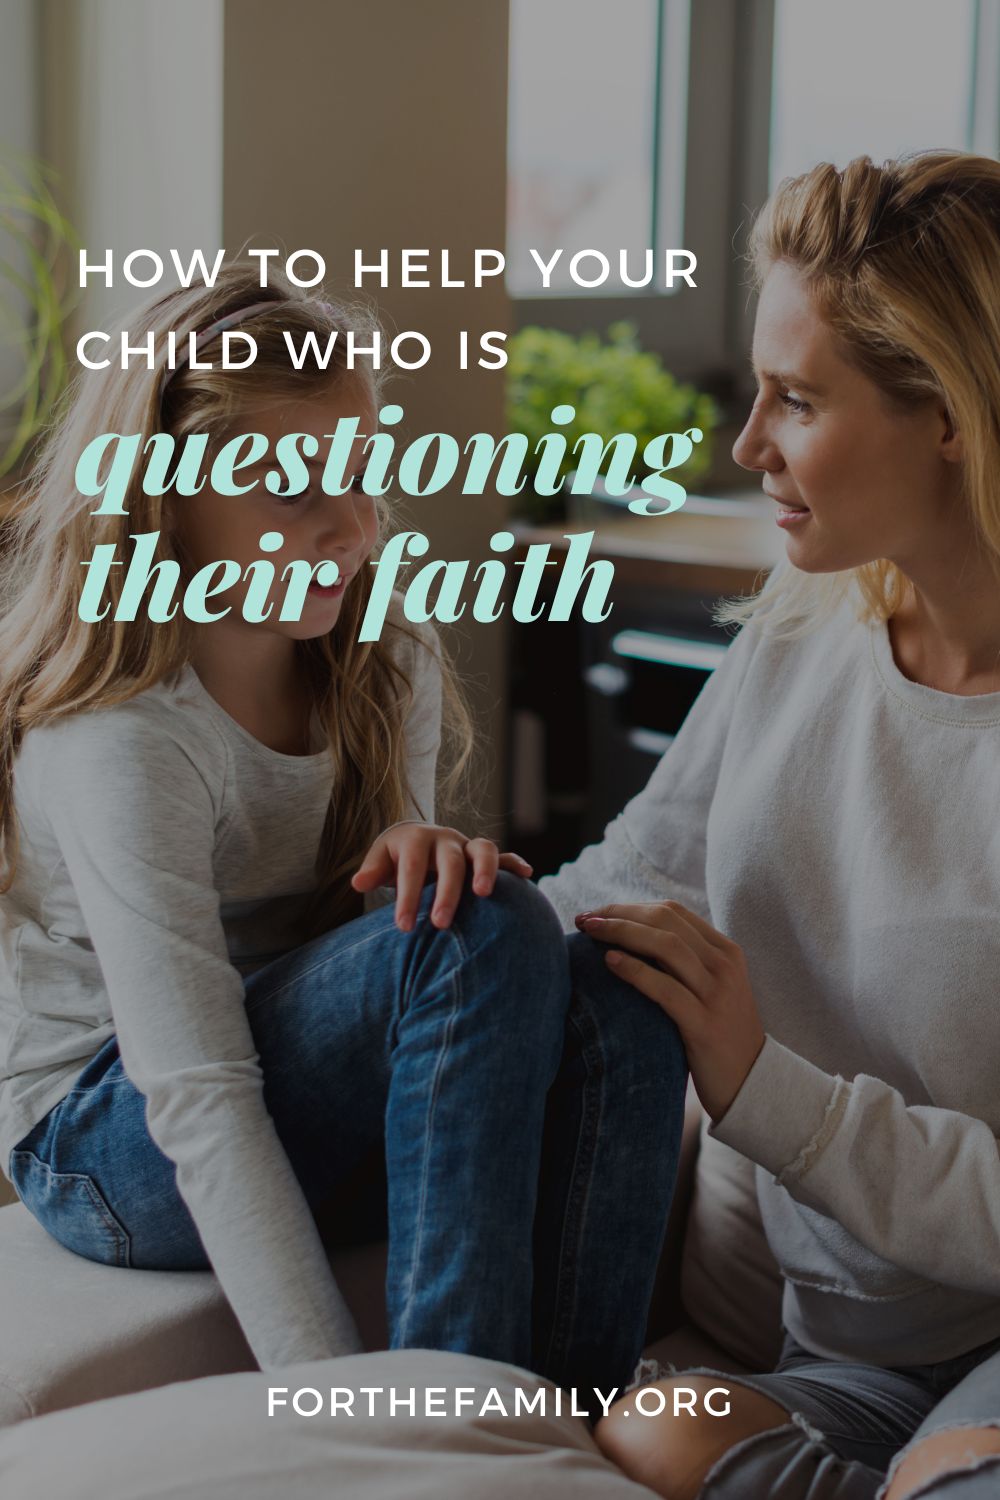 How to Help Your Child Who is Questioning Their Faith